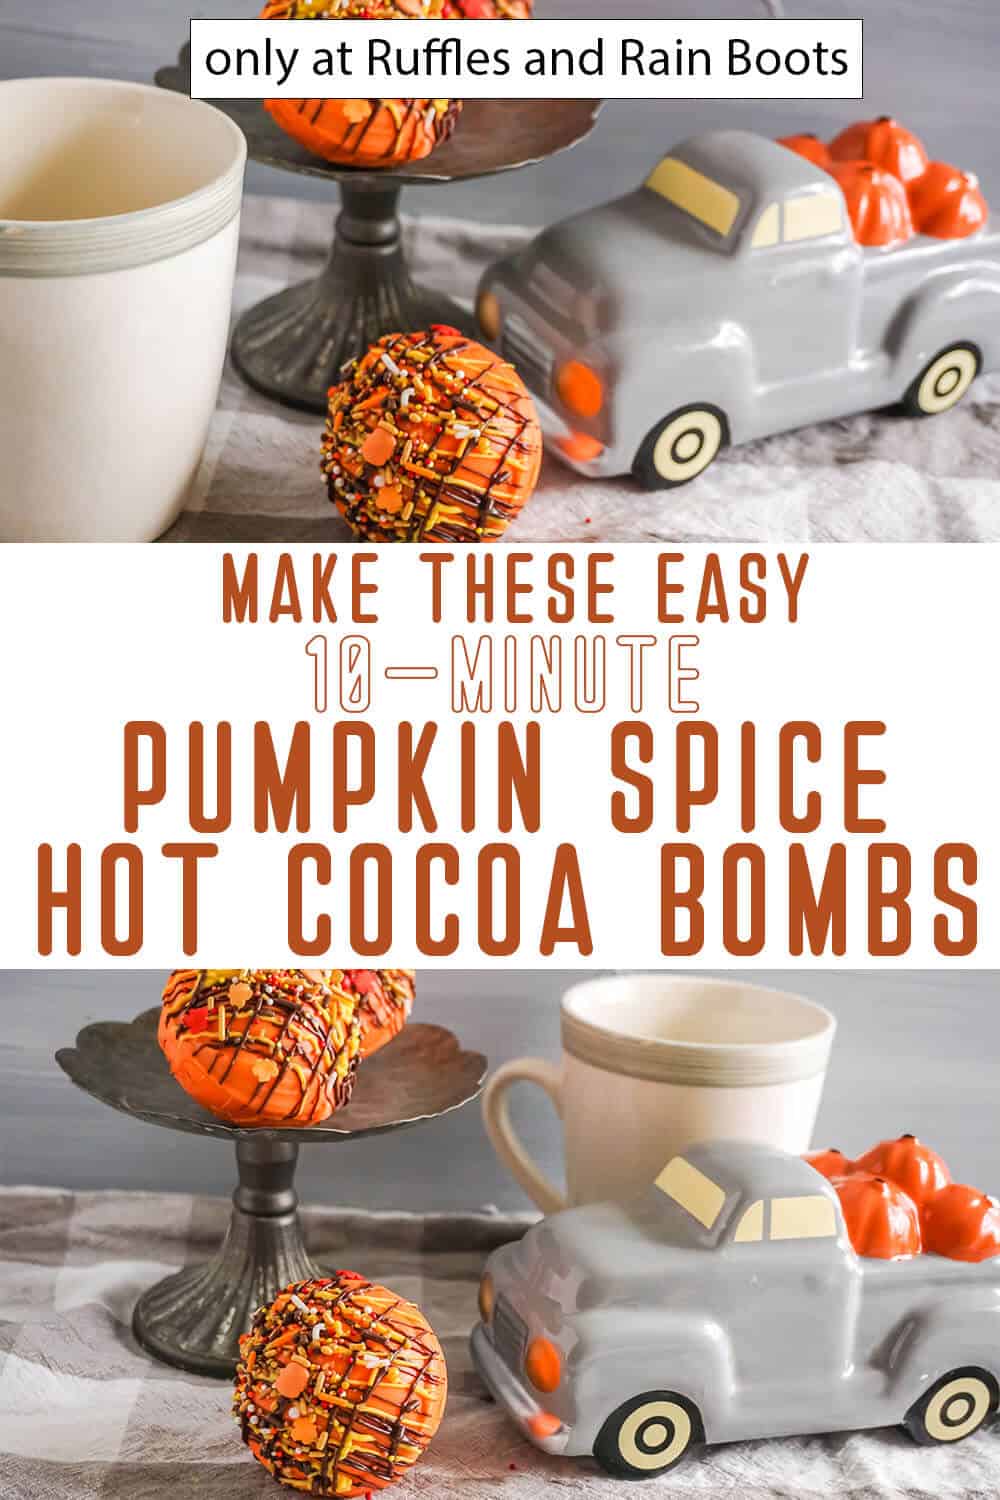 Photo of pumpkin spice hot cocoa bombs with text which reads, "Make these easy 10-minute pumpkin spice hot cocoa bombs."